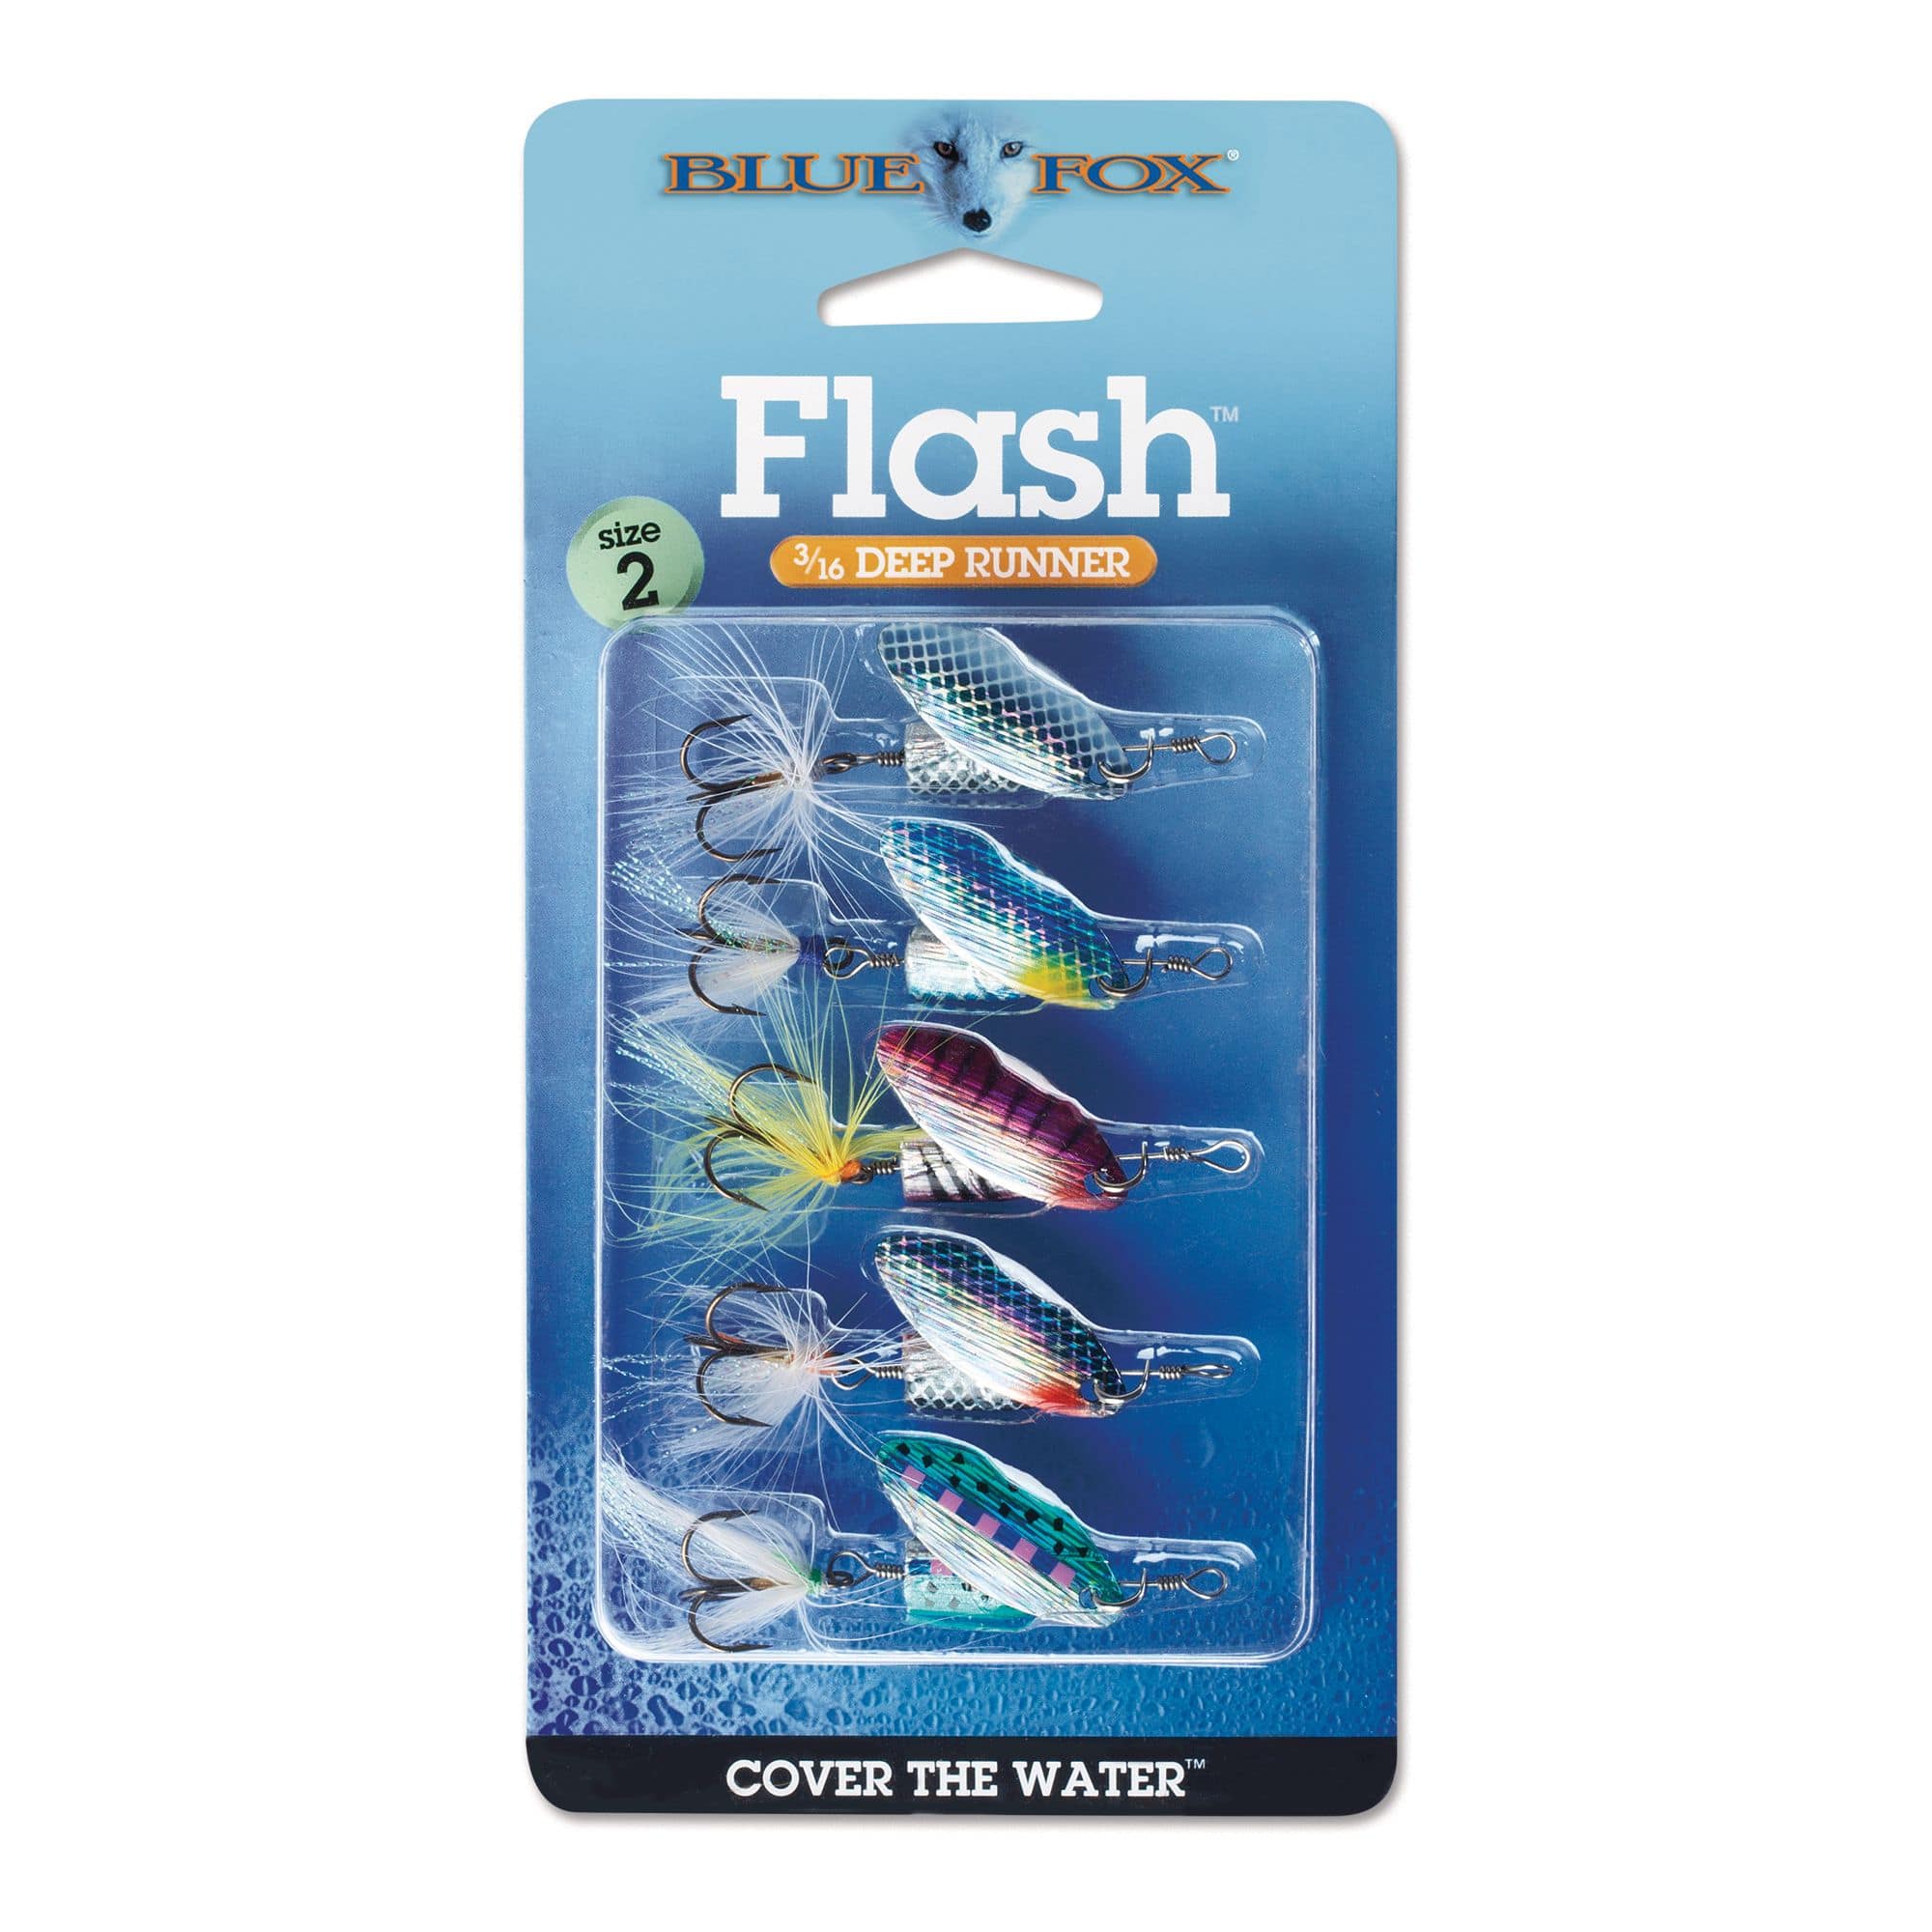 https://media-www.canadiantire.ca/product/playing/fishing/fishing-lures/0772901/blue-fox-flash-spinner-kit-5-pc-3-16-oz-5018ea2f-1818-40bd-94f0-dbf50fc75d33-jpgrendition.jpg